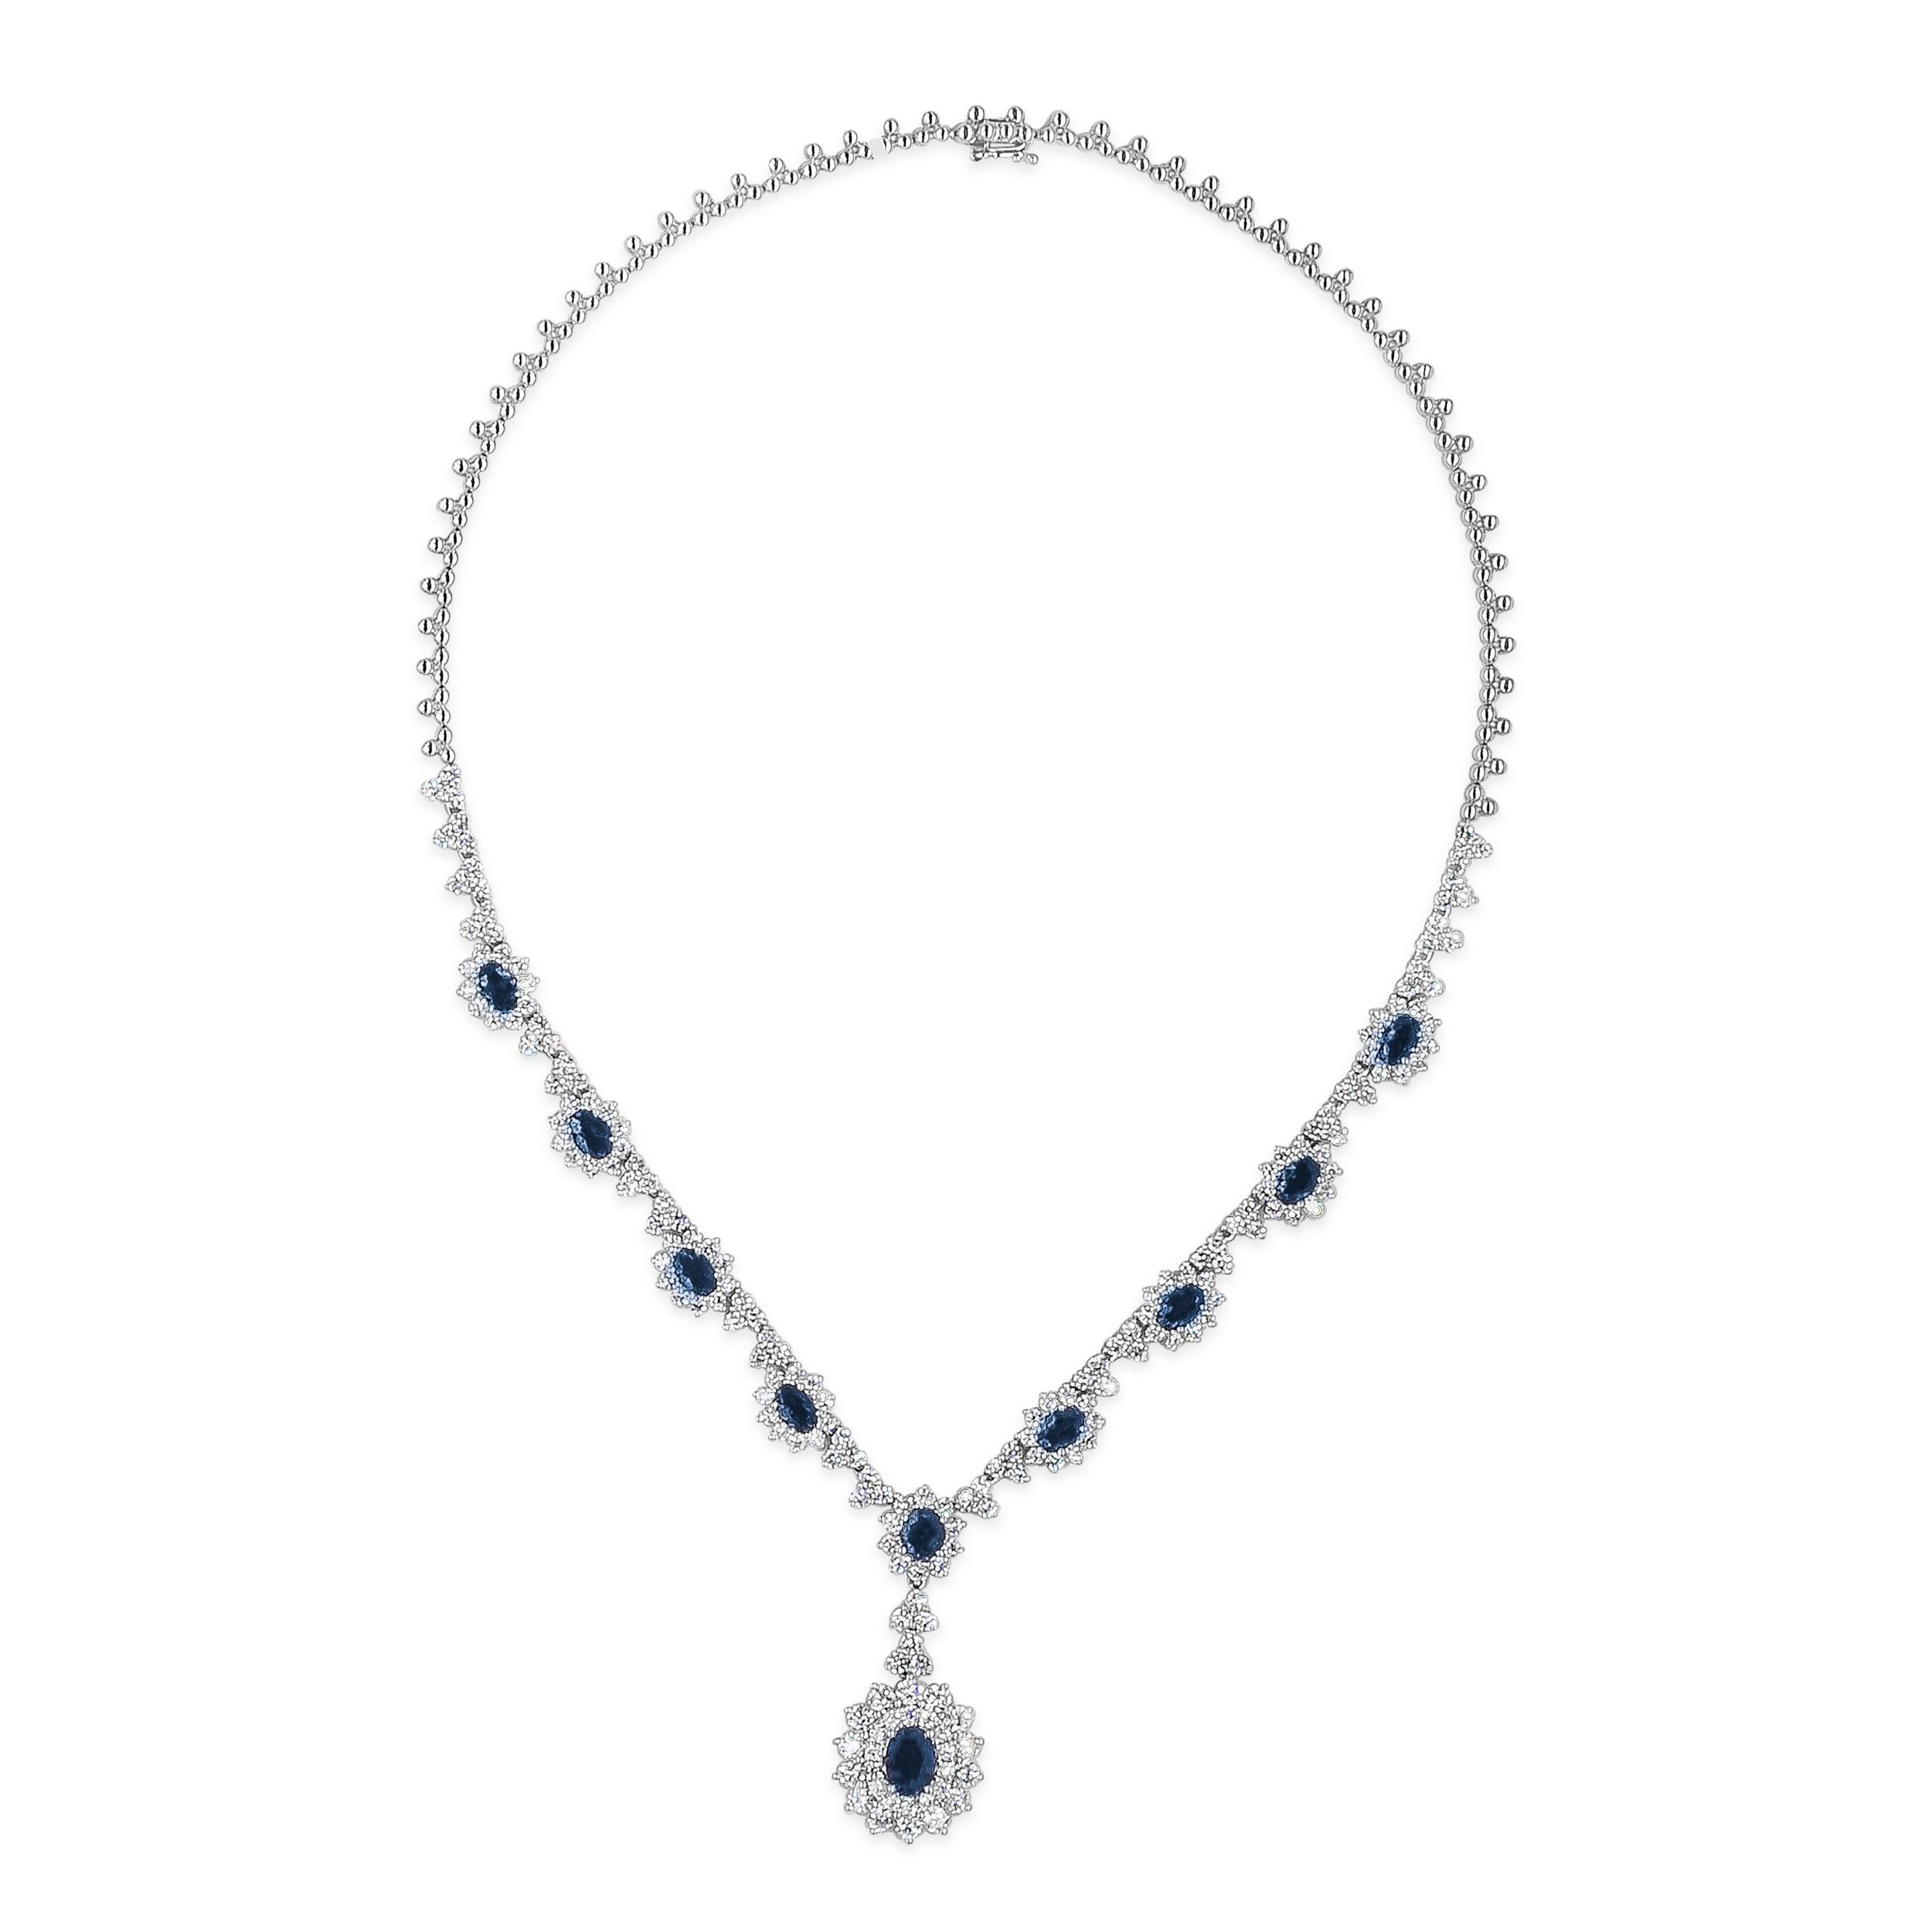 This elegant and classy pendant necklace showcasing a drop pendant with a 2.50 carats oval cut blue sapphire, surrounded by two rows of round brilliant diamonds. Suspended on a blue sapphire set in a round diamond encrusted halo design